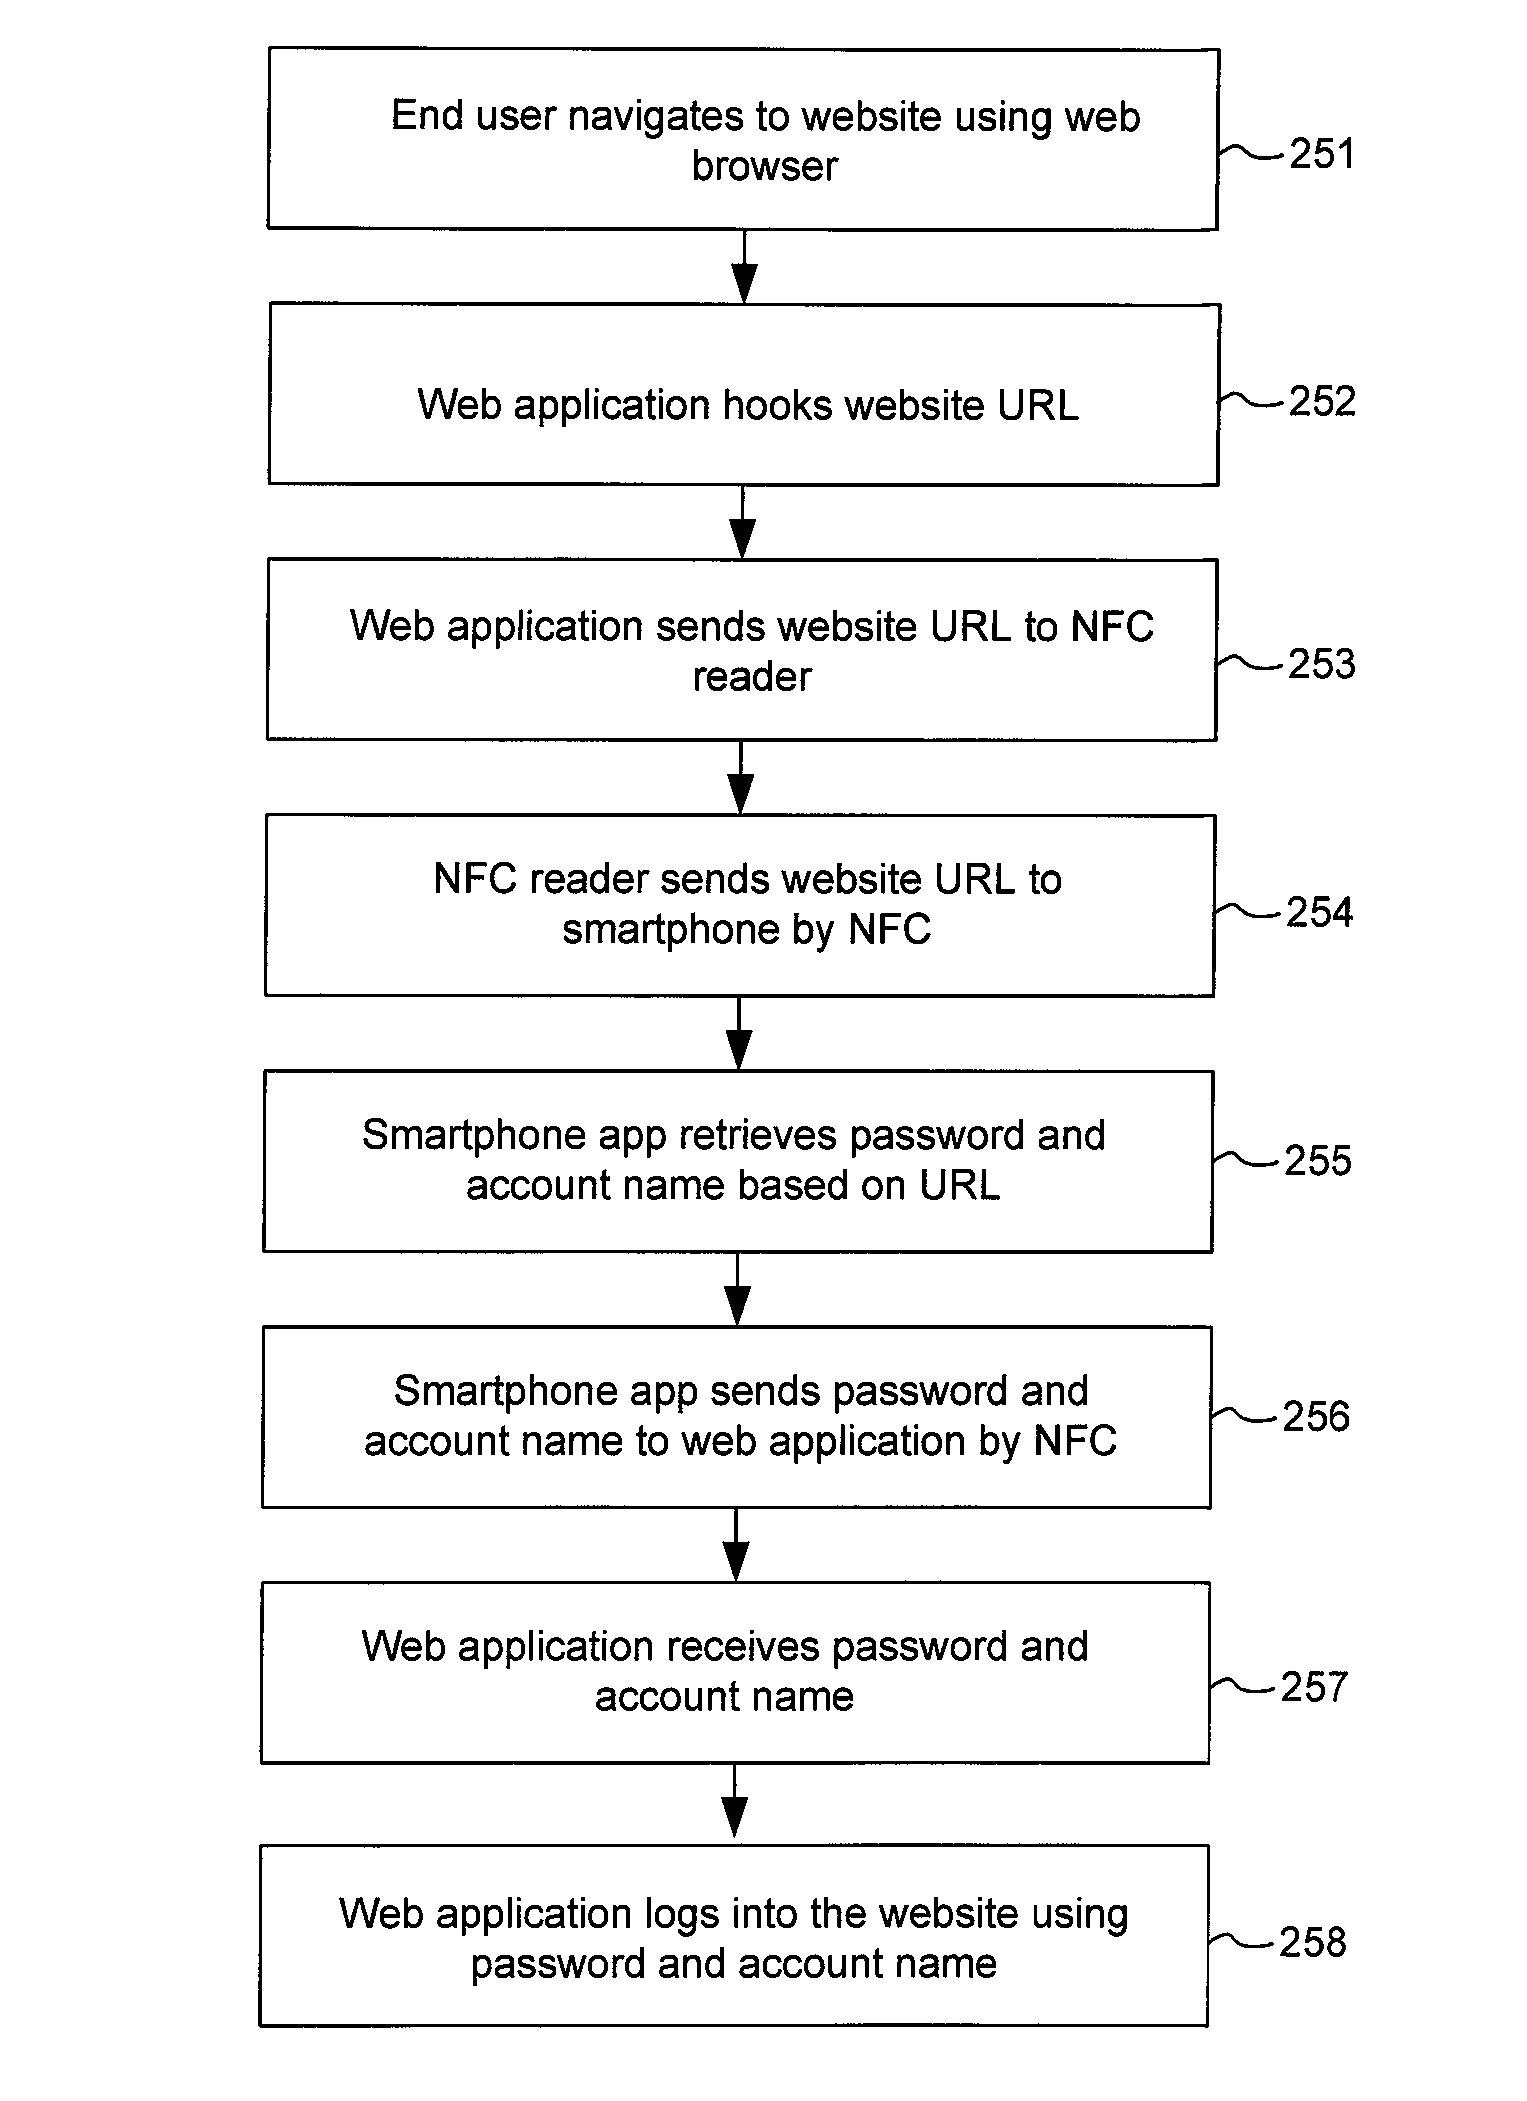 Systems and methods for accessing websites using smartphones